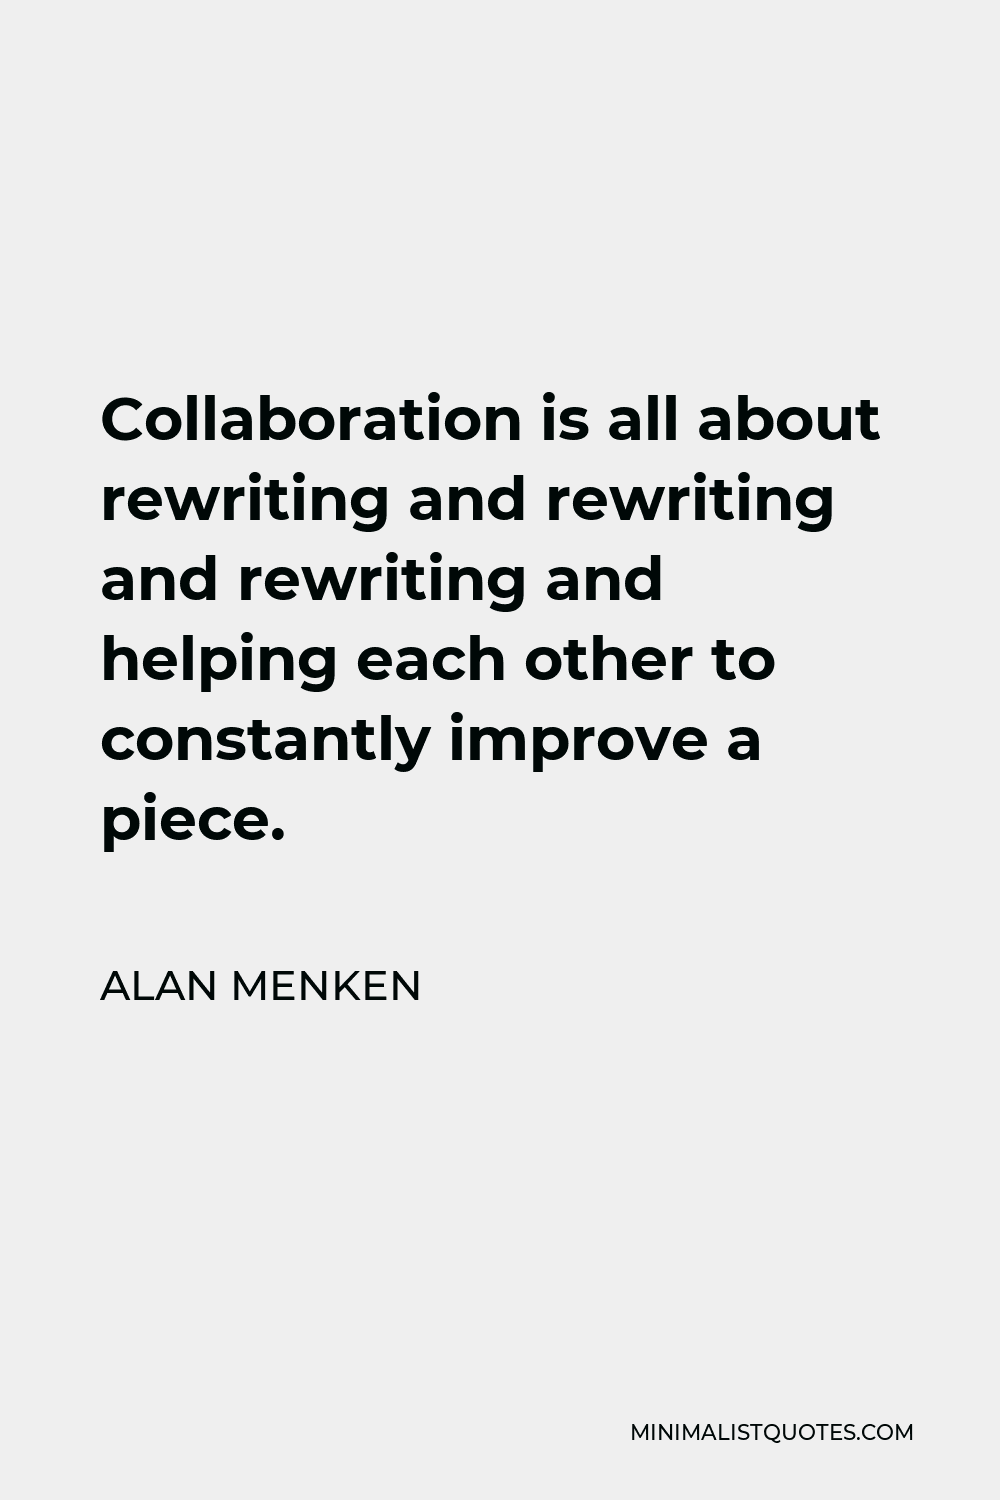 Alan Menken Quote - Collaboration is all about rewriting and rewriting and rewriting and helping each other to constantly improve a piece.